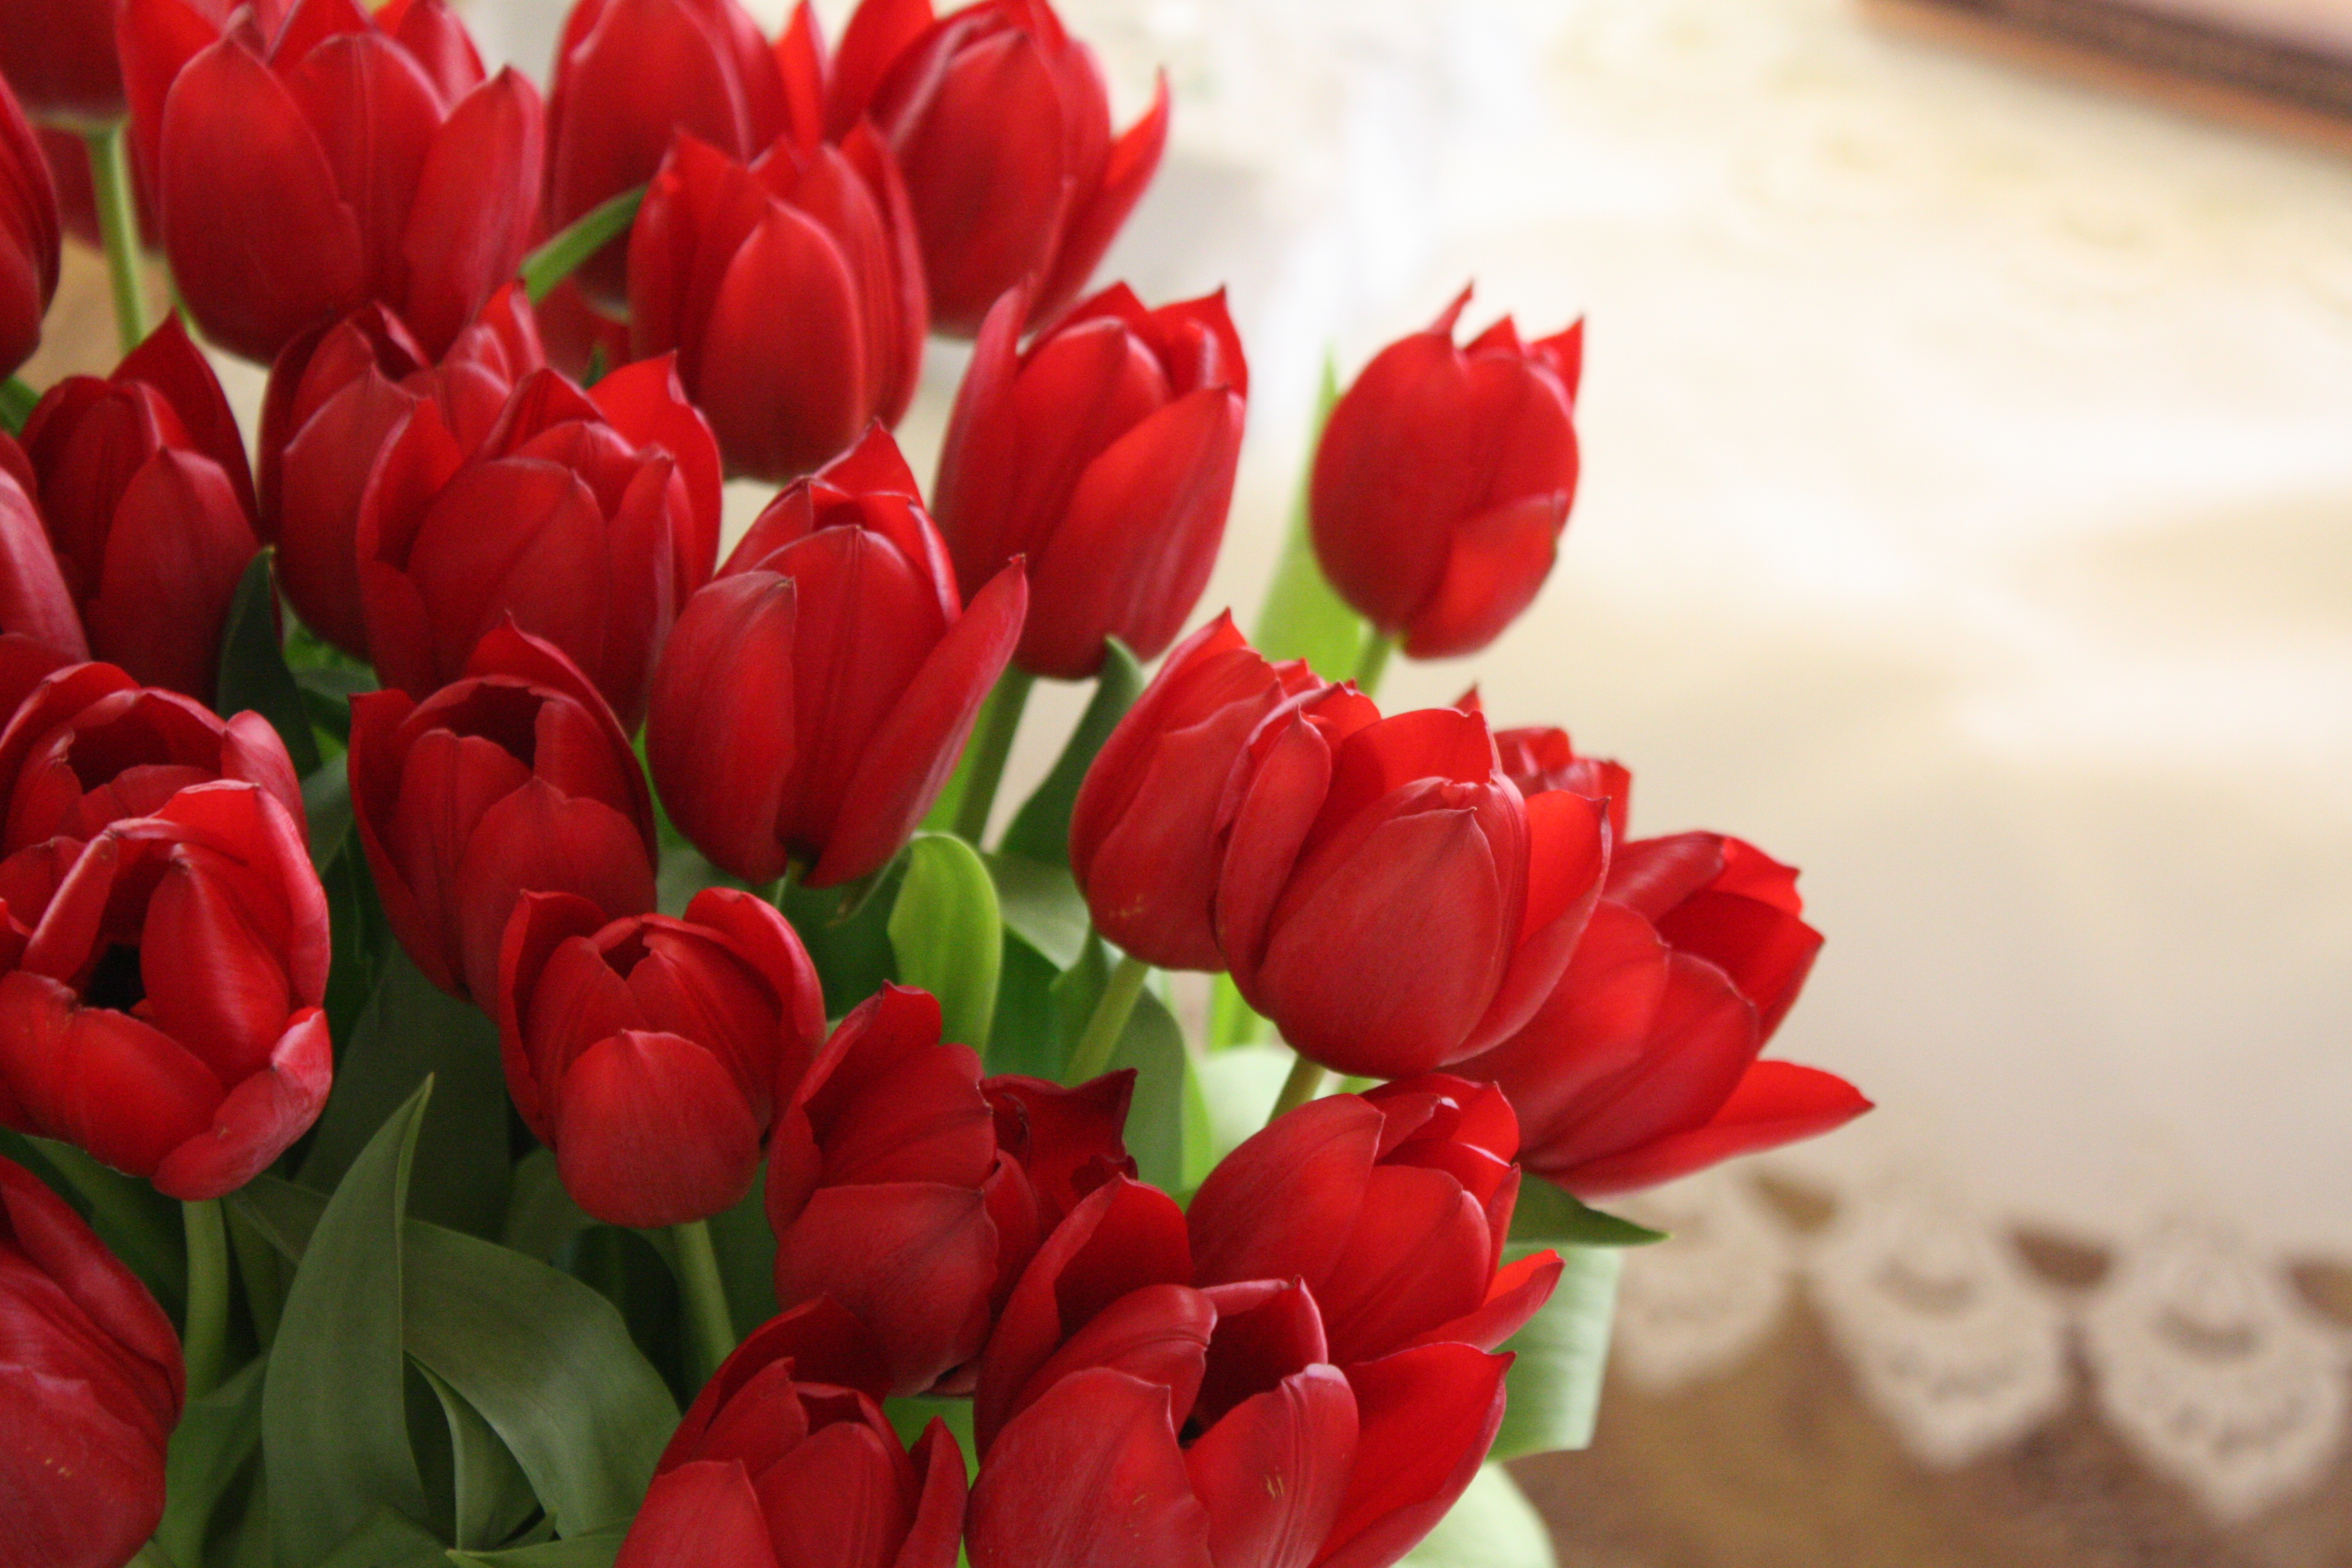 flowers, tulips, red, bouquet, handsomely, it's beautiful UHD